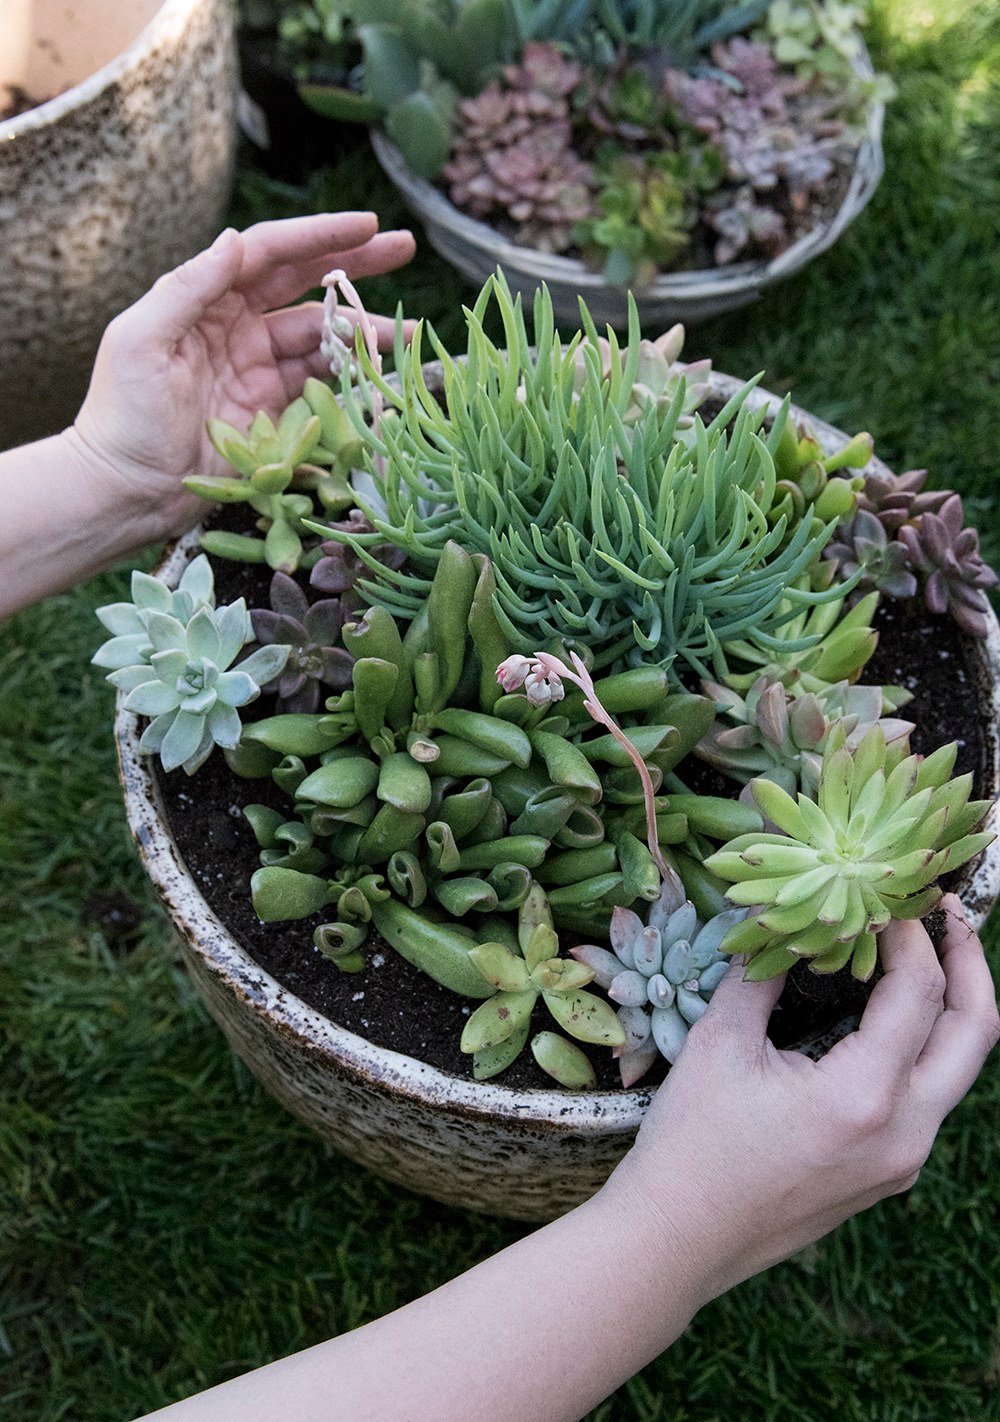 10 Posts for Those Who Love Plants & Gardening - roomfortuesday.com